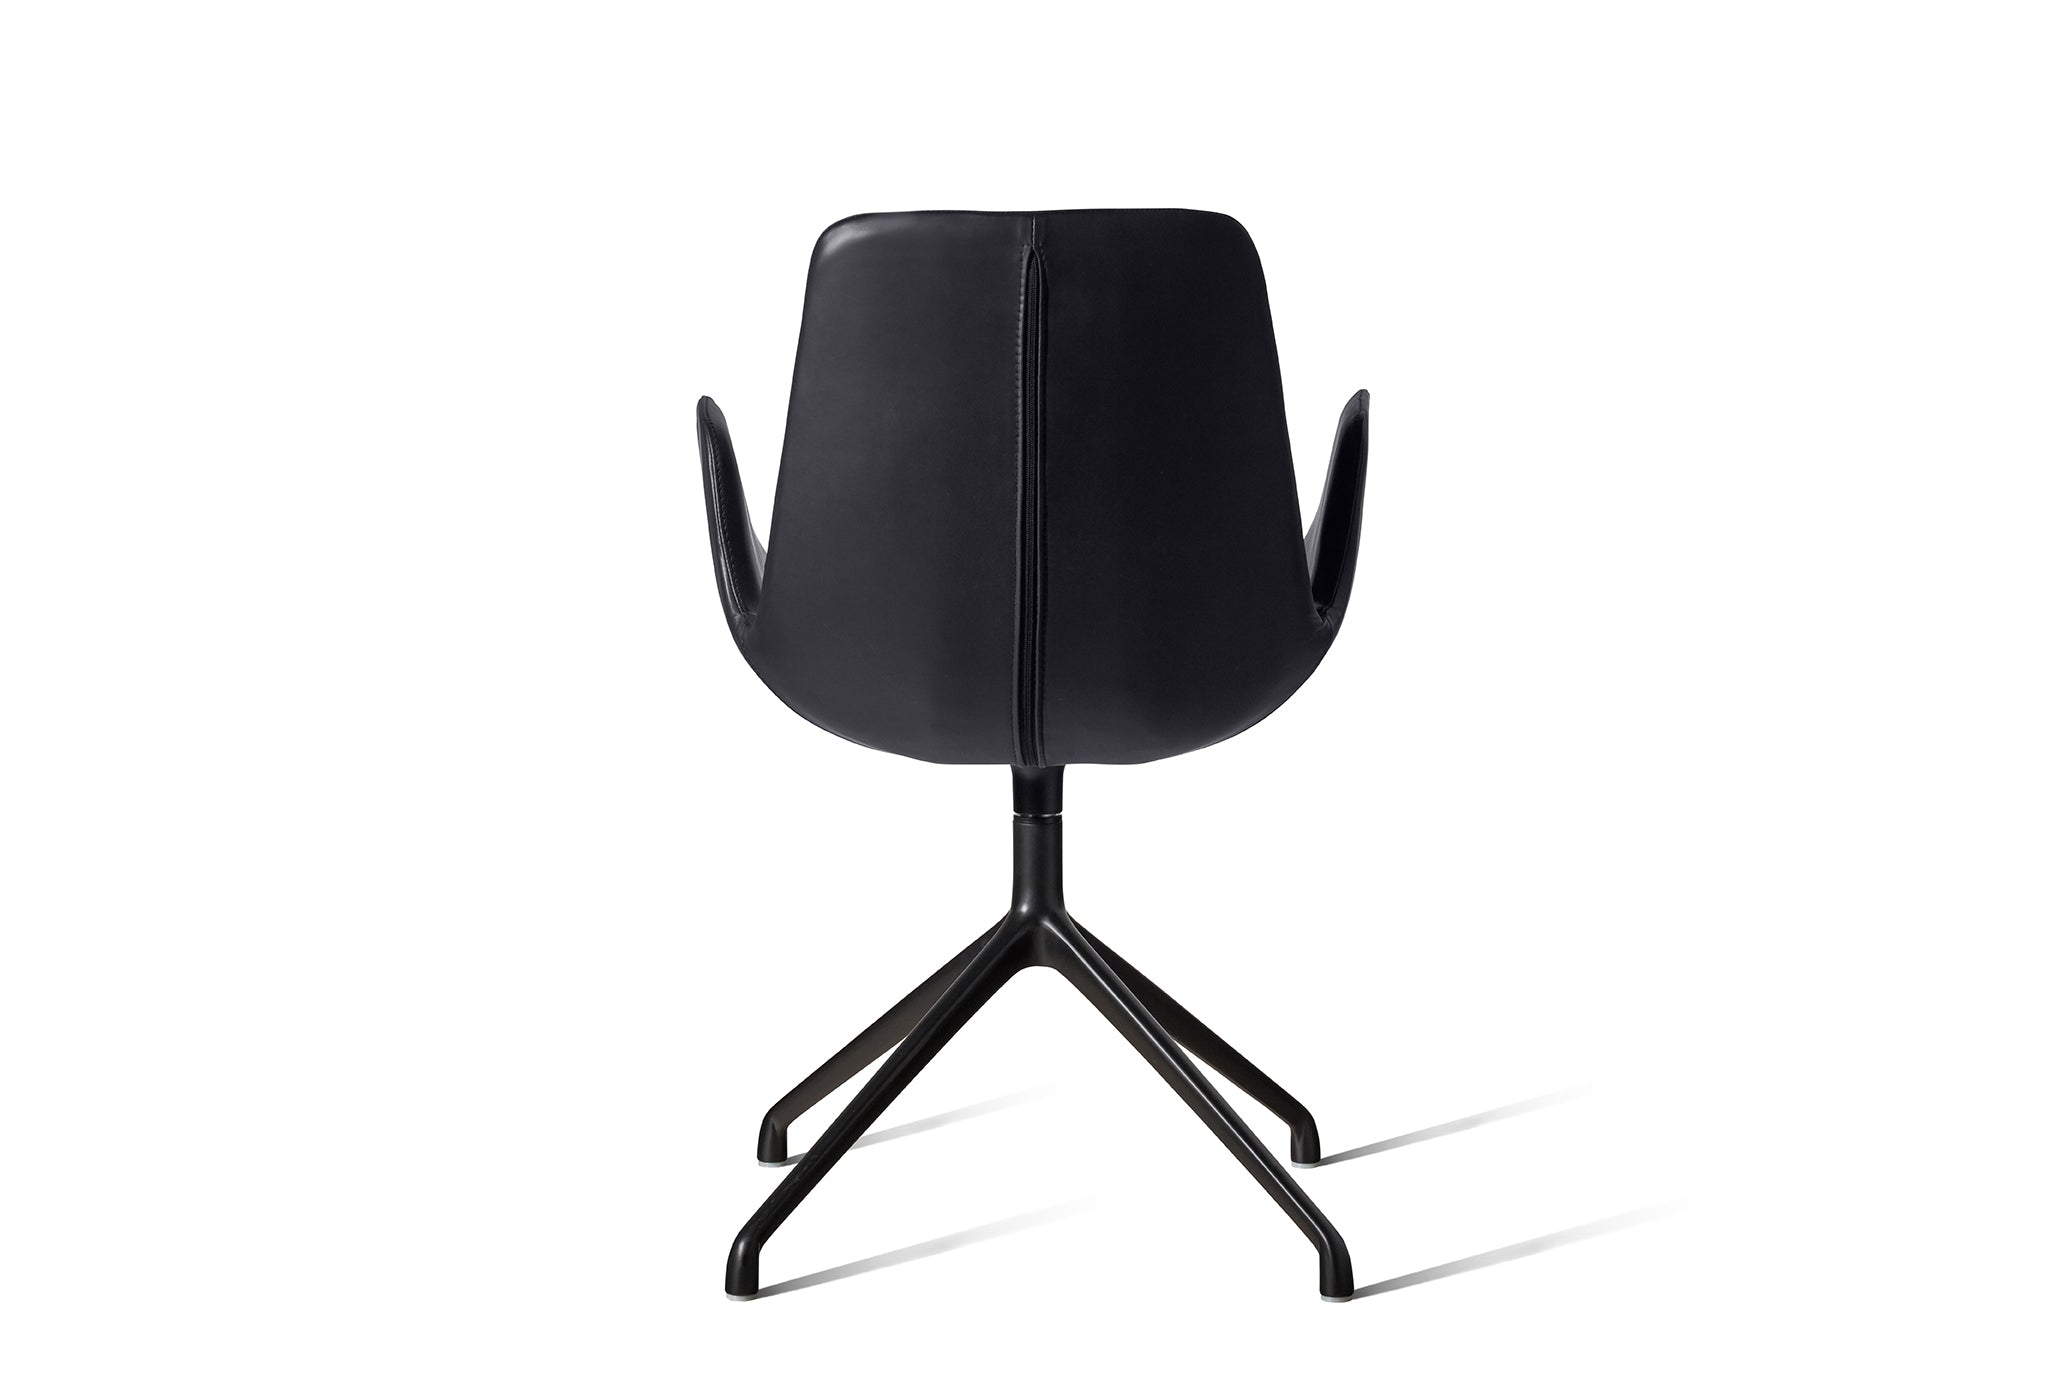 Cloud Boardroom Chair Black Leather 50% OFF - Zuster Furniture